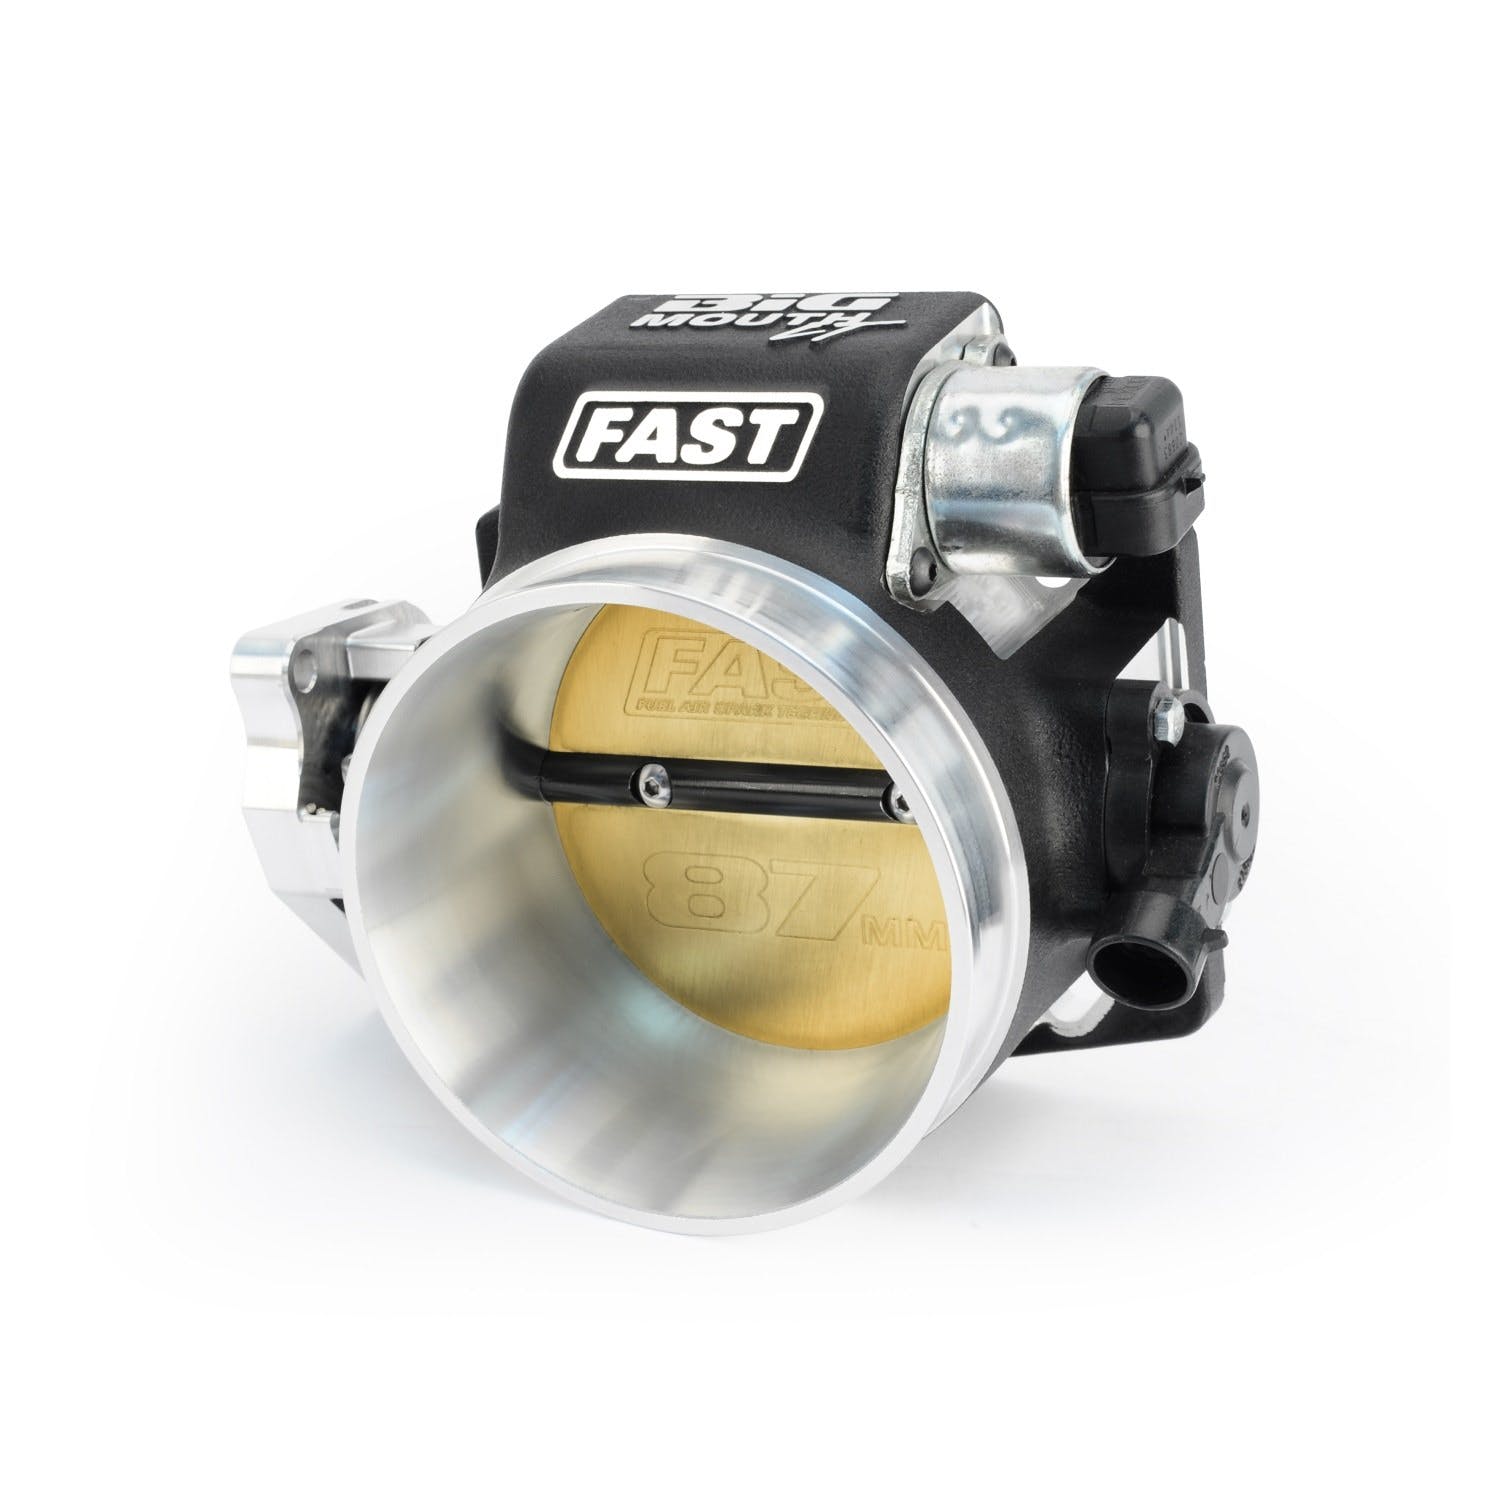 FAST - Fuel Air Spark Technology 54088 Fuel Injection Throttle Body